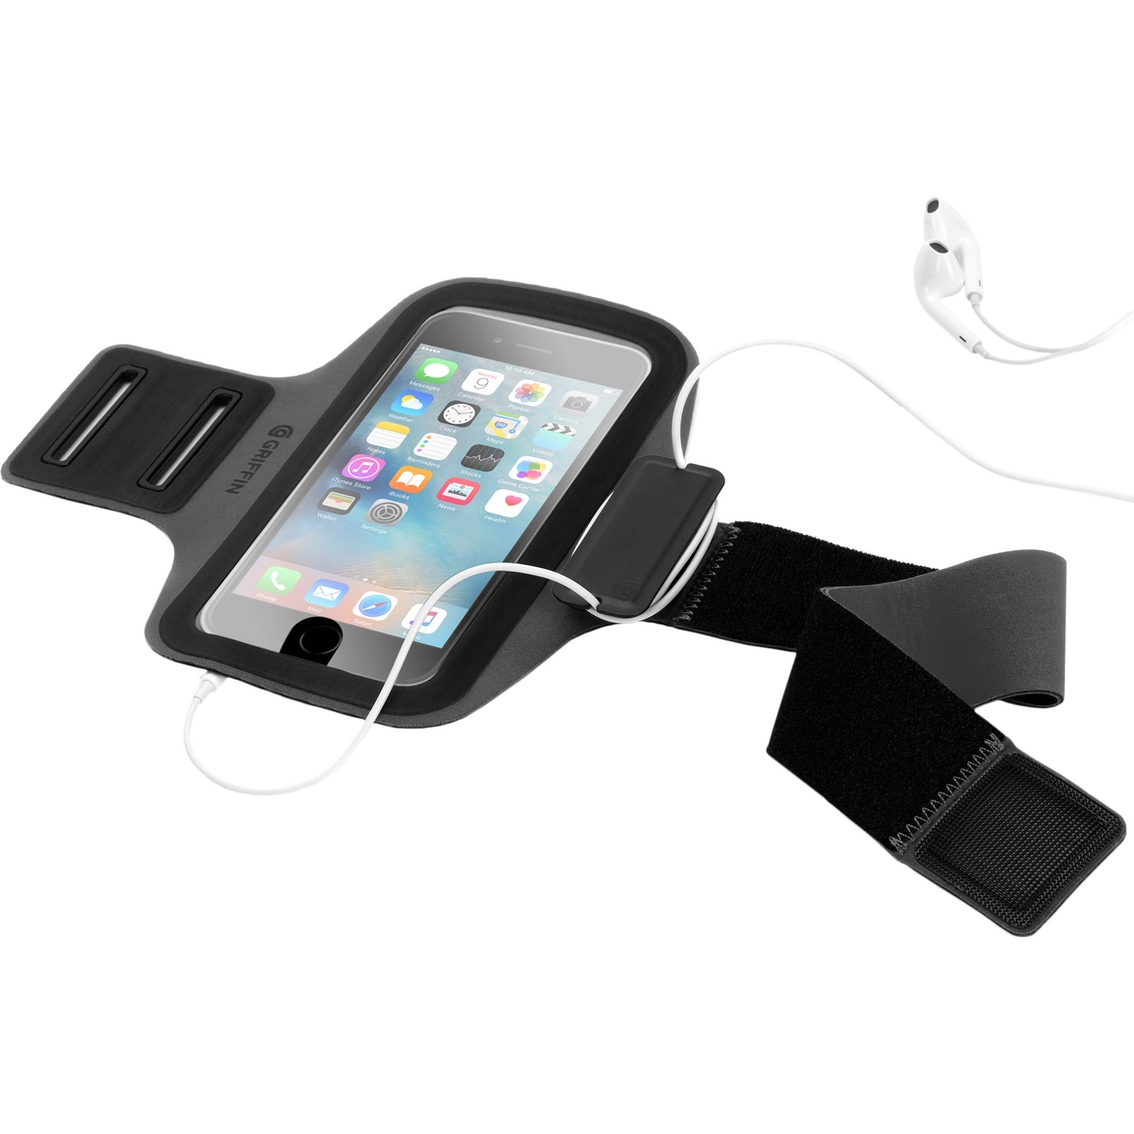 Griffin Trainer Plus Armband for iPhone 6 or 6s Black/Gray - Image 2 of 2